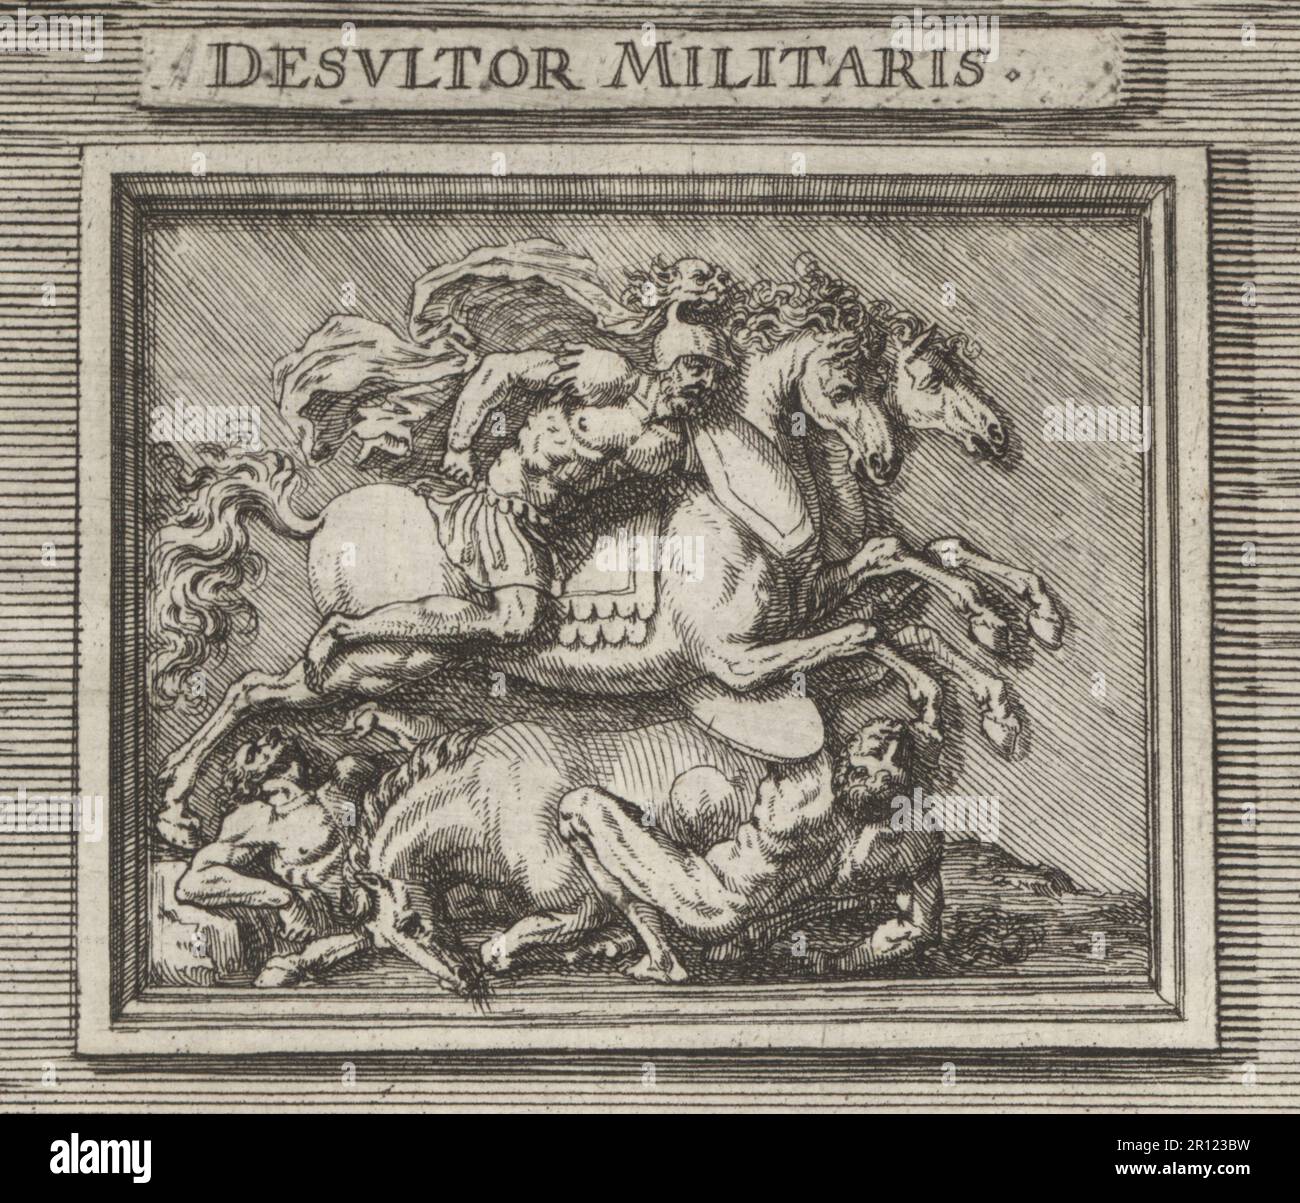 A Roman cavalryman or military desultor leaping between two horses over fallen warriors and a horse. The equestrian rider in helmet, cape, and lorica musculata breastplate, armed with a parma shield. Desultor Militaris. Copperplate engraving after an illustration by Joachim von Sandrart from his L’Academia Todesca, della Architectura, Scultura & Pittura, oder Teutsche Academie, der Edlen Bau- Bild- und Mahlerey-Kunste, German Academy of Architecture, Sculpture and Painting, Jacob von Sandrart, Nuremberg, 1675. Stock Photo